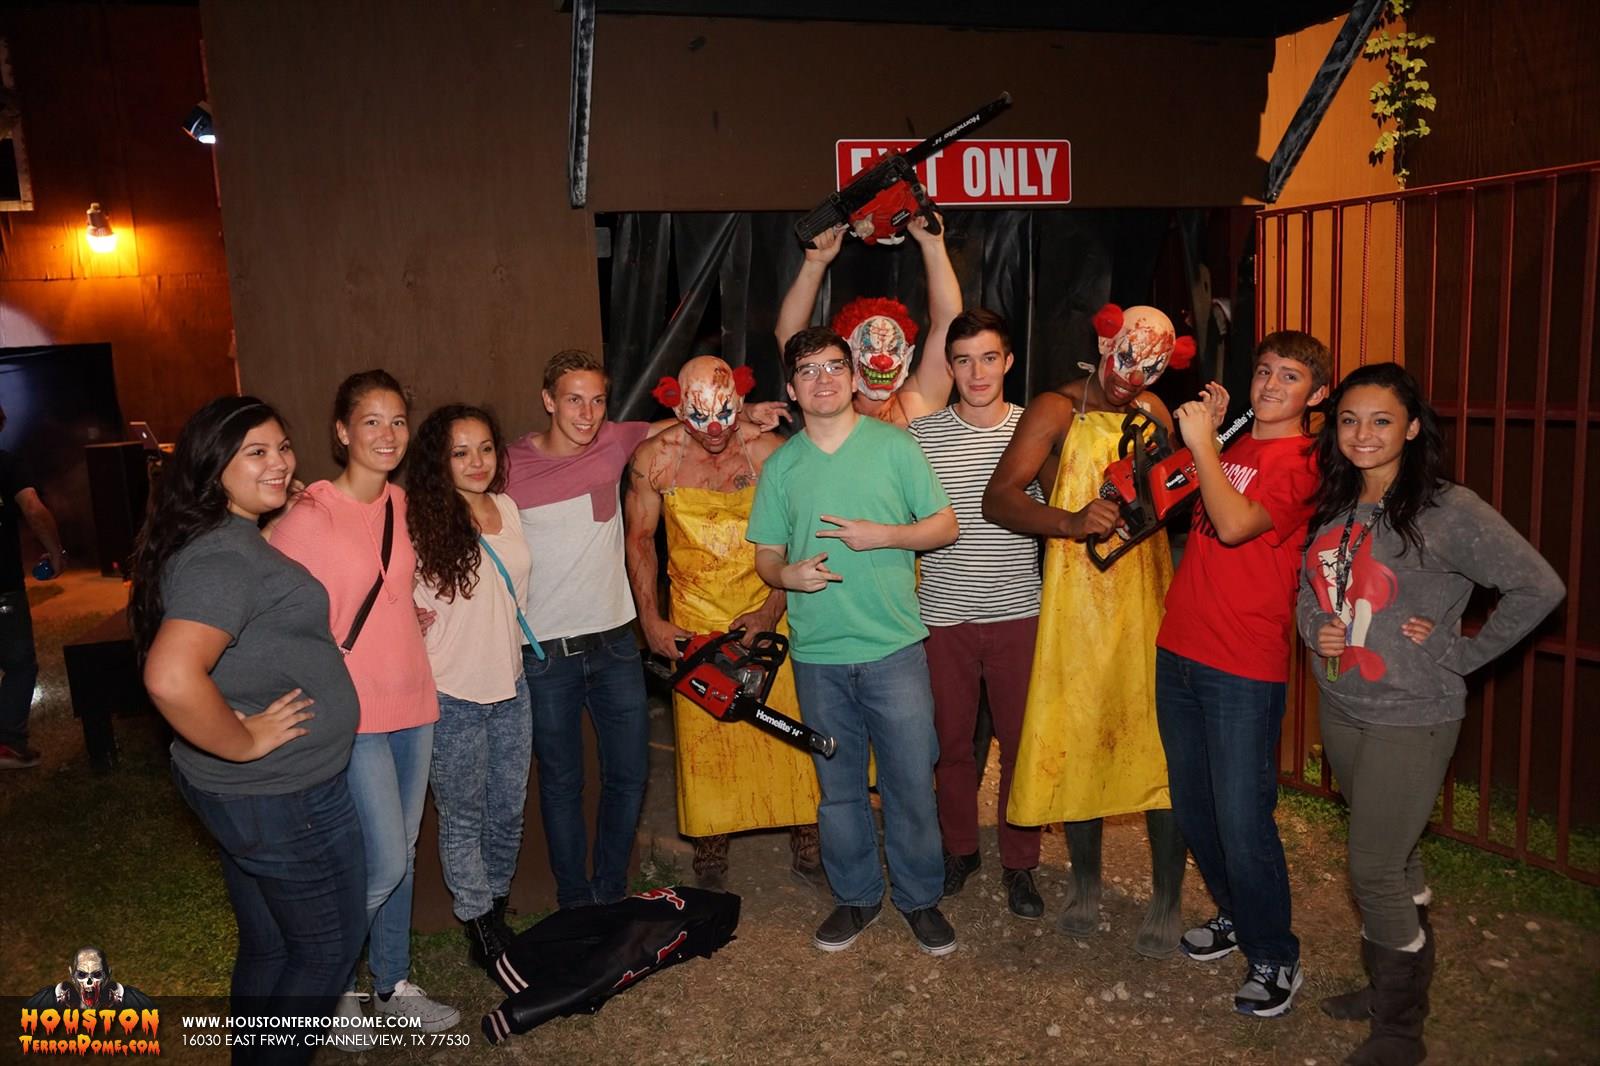 Group photo at the haunted house. 